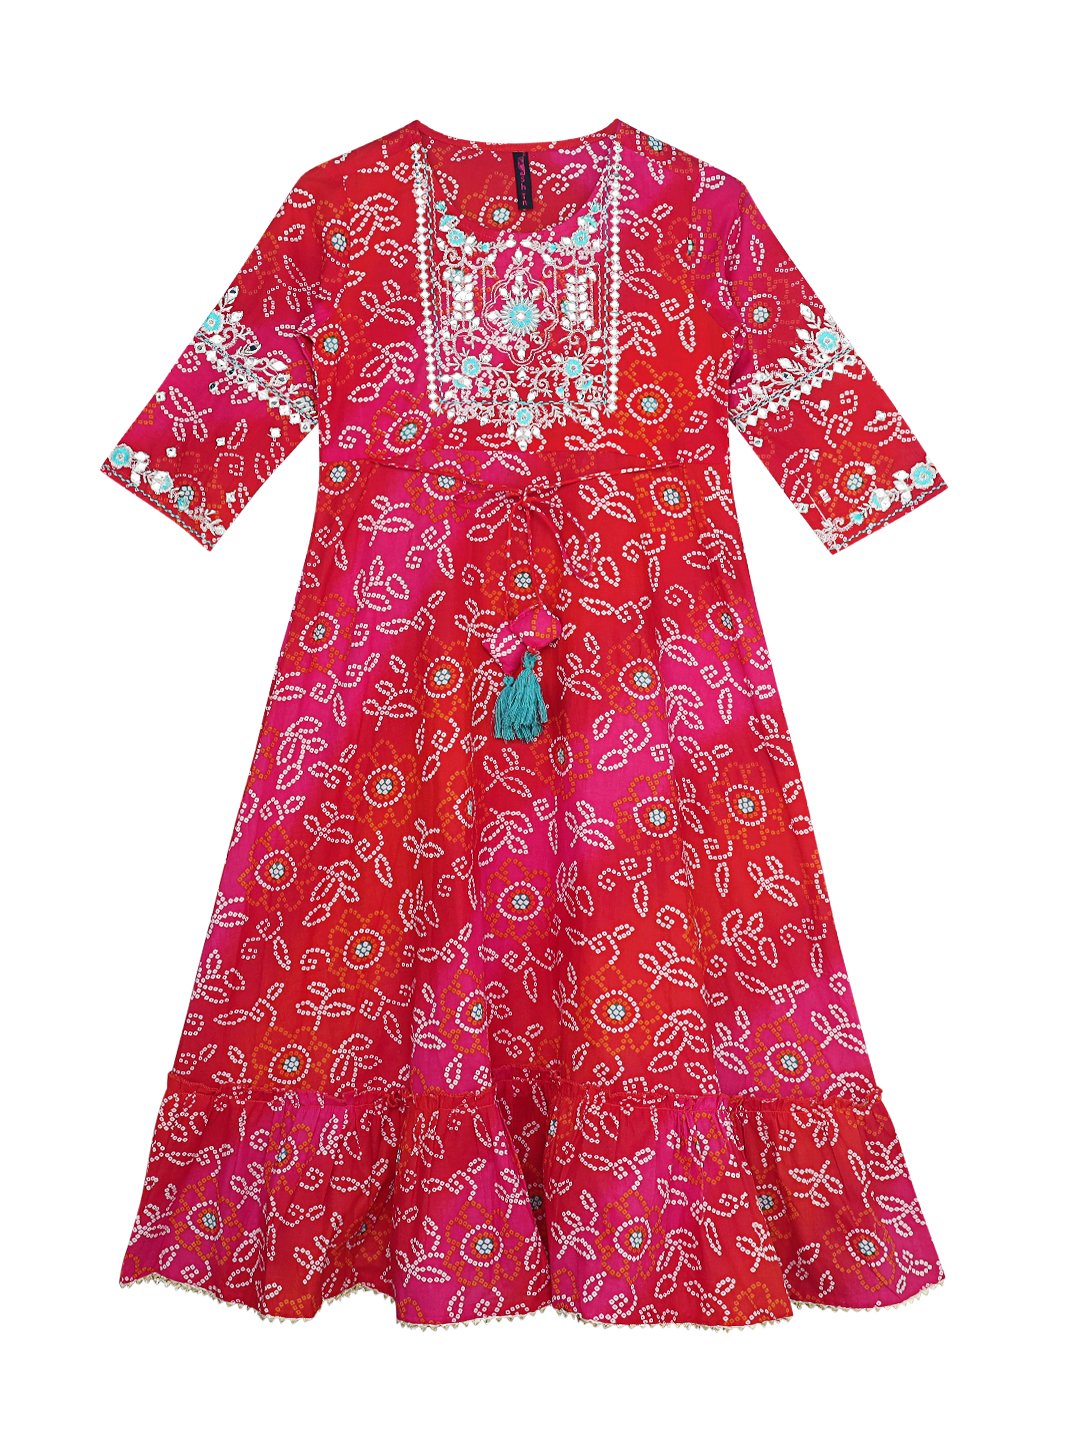 Ishin Girls Pink Embroidered Tiered Dress